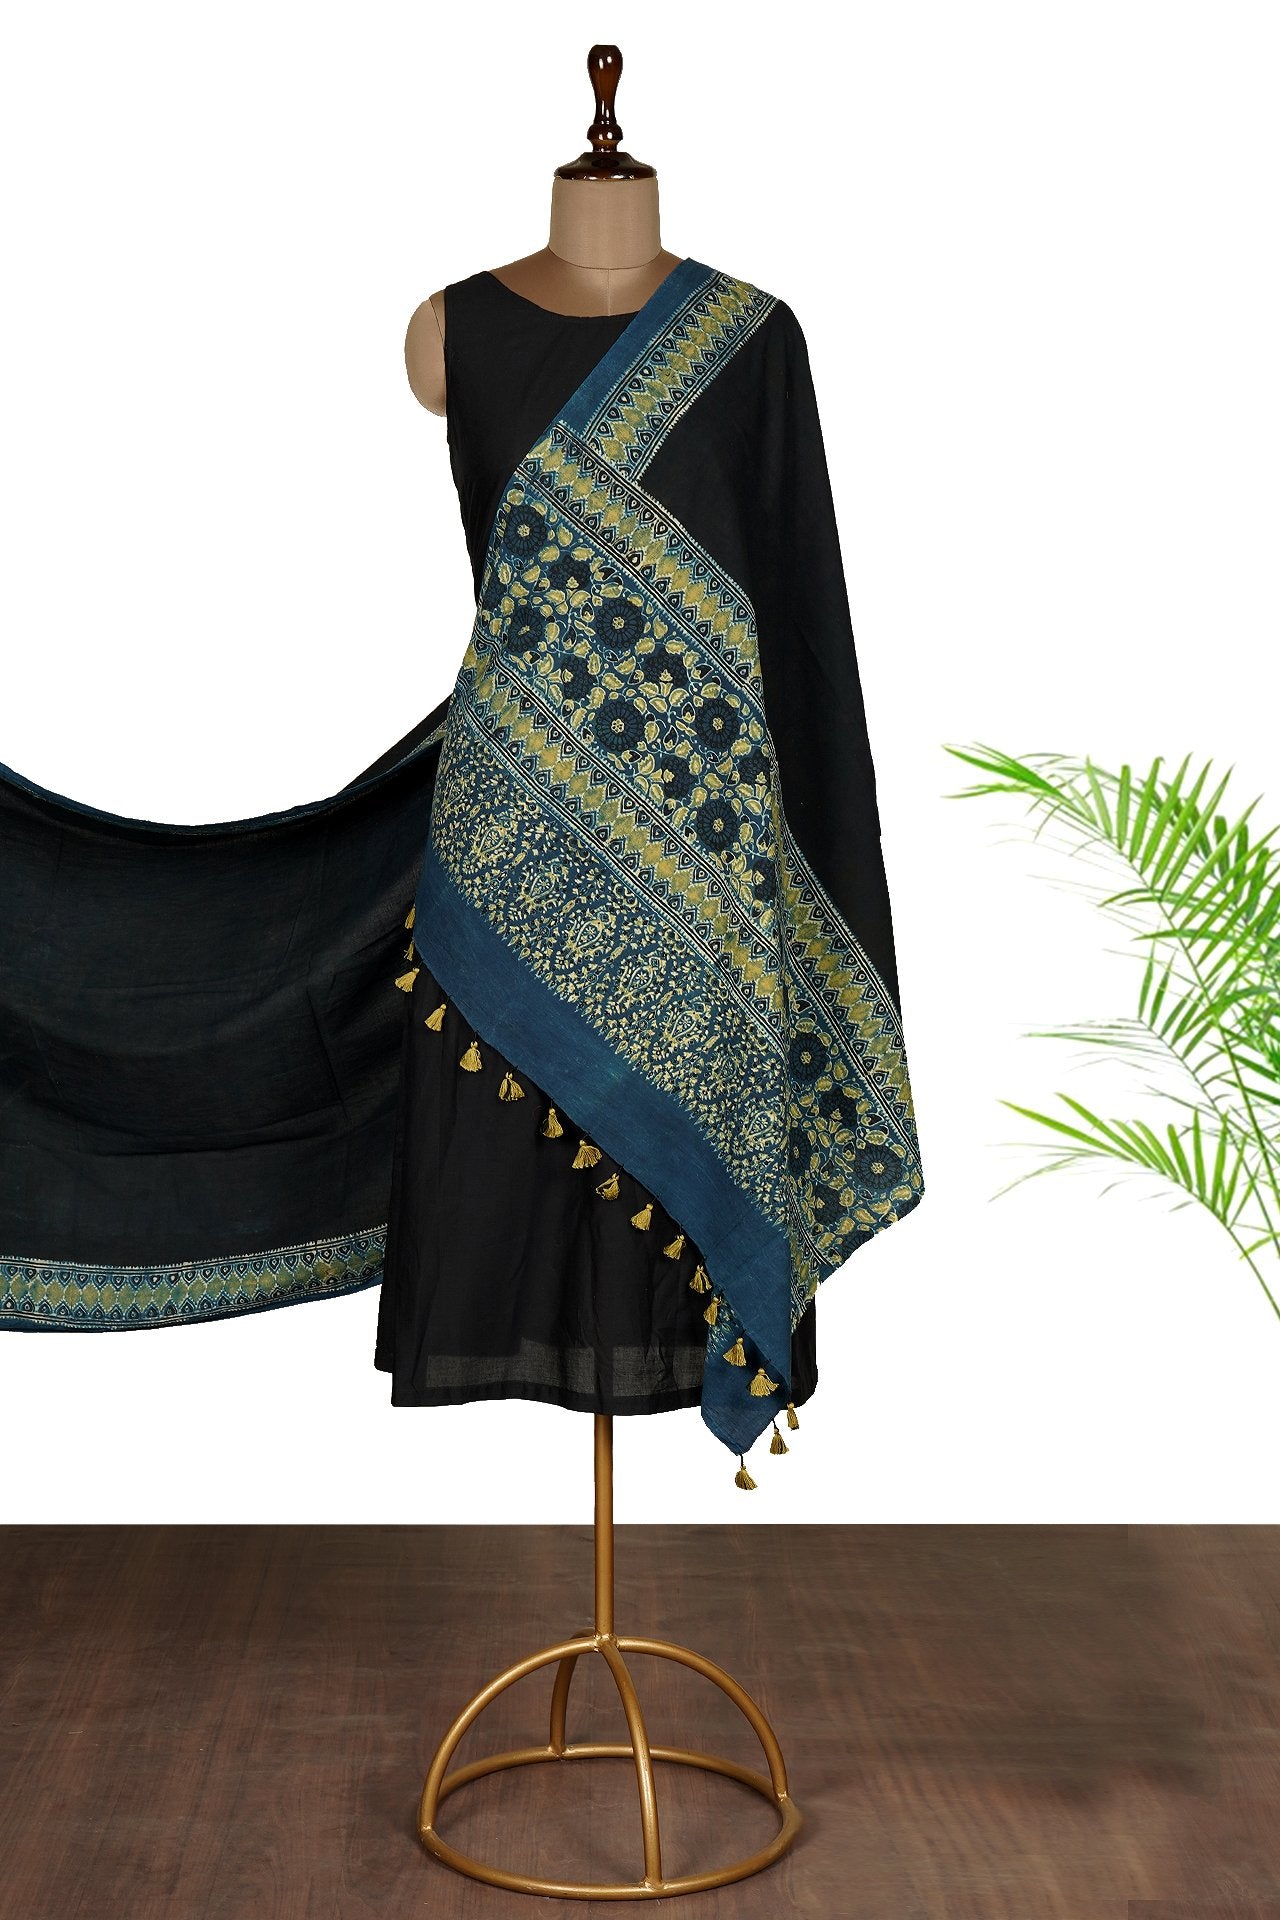 Dark Navy Blue Color Handcrafted Ajrak Printed Pure Cotton Dupatta with Tassels